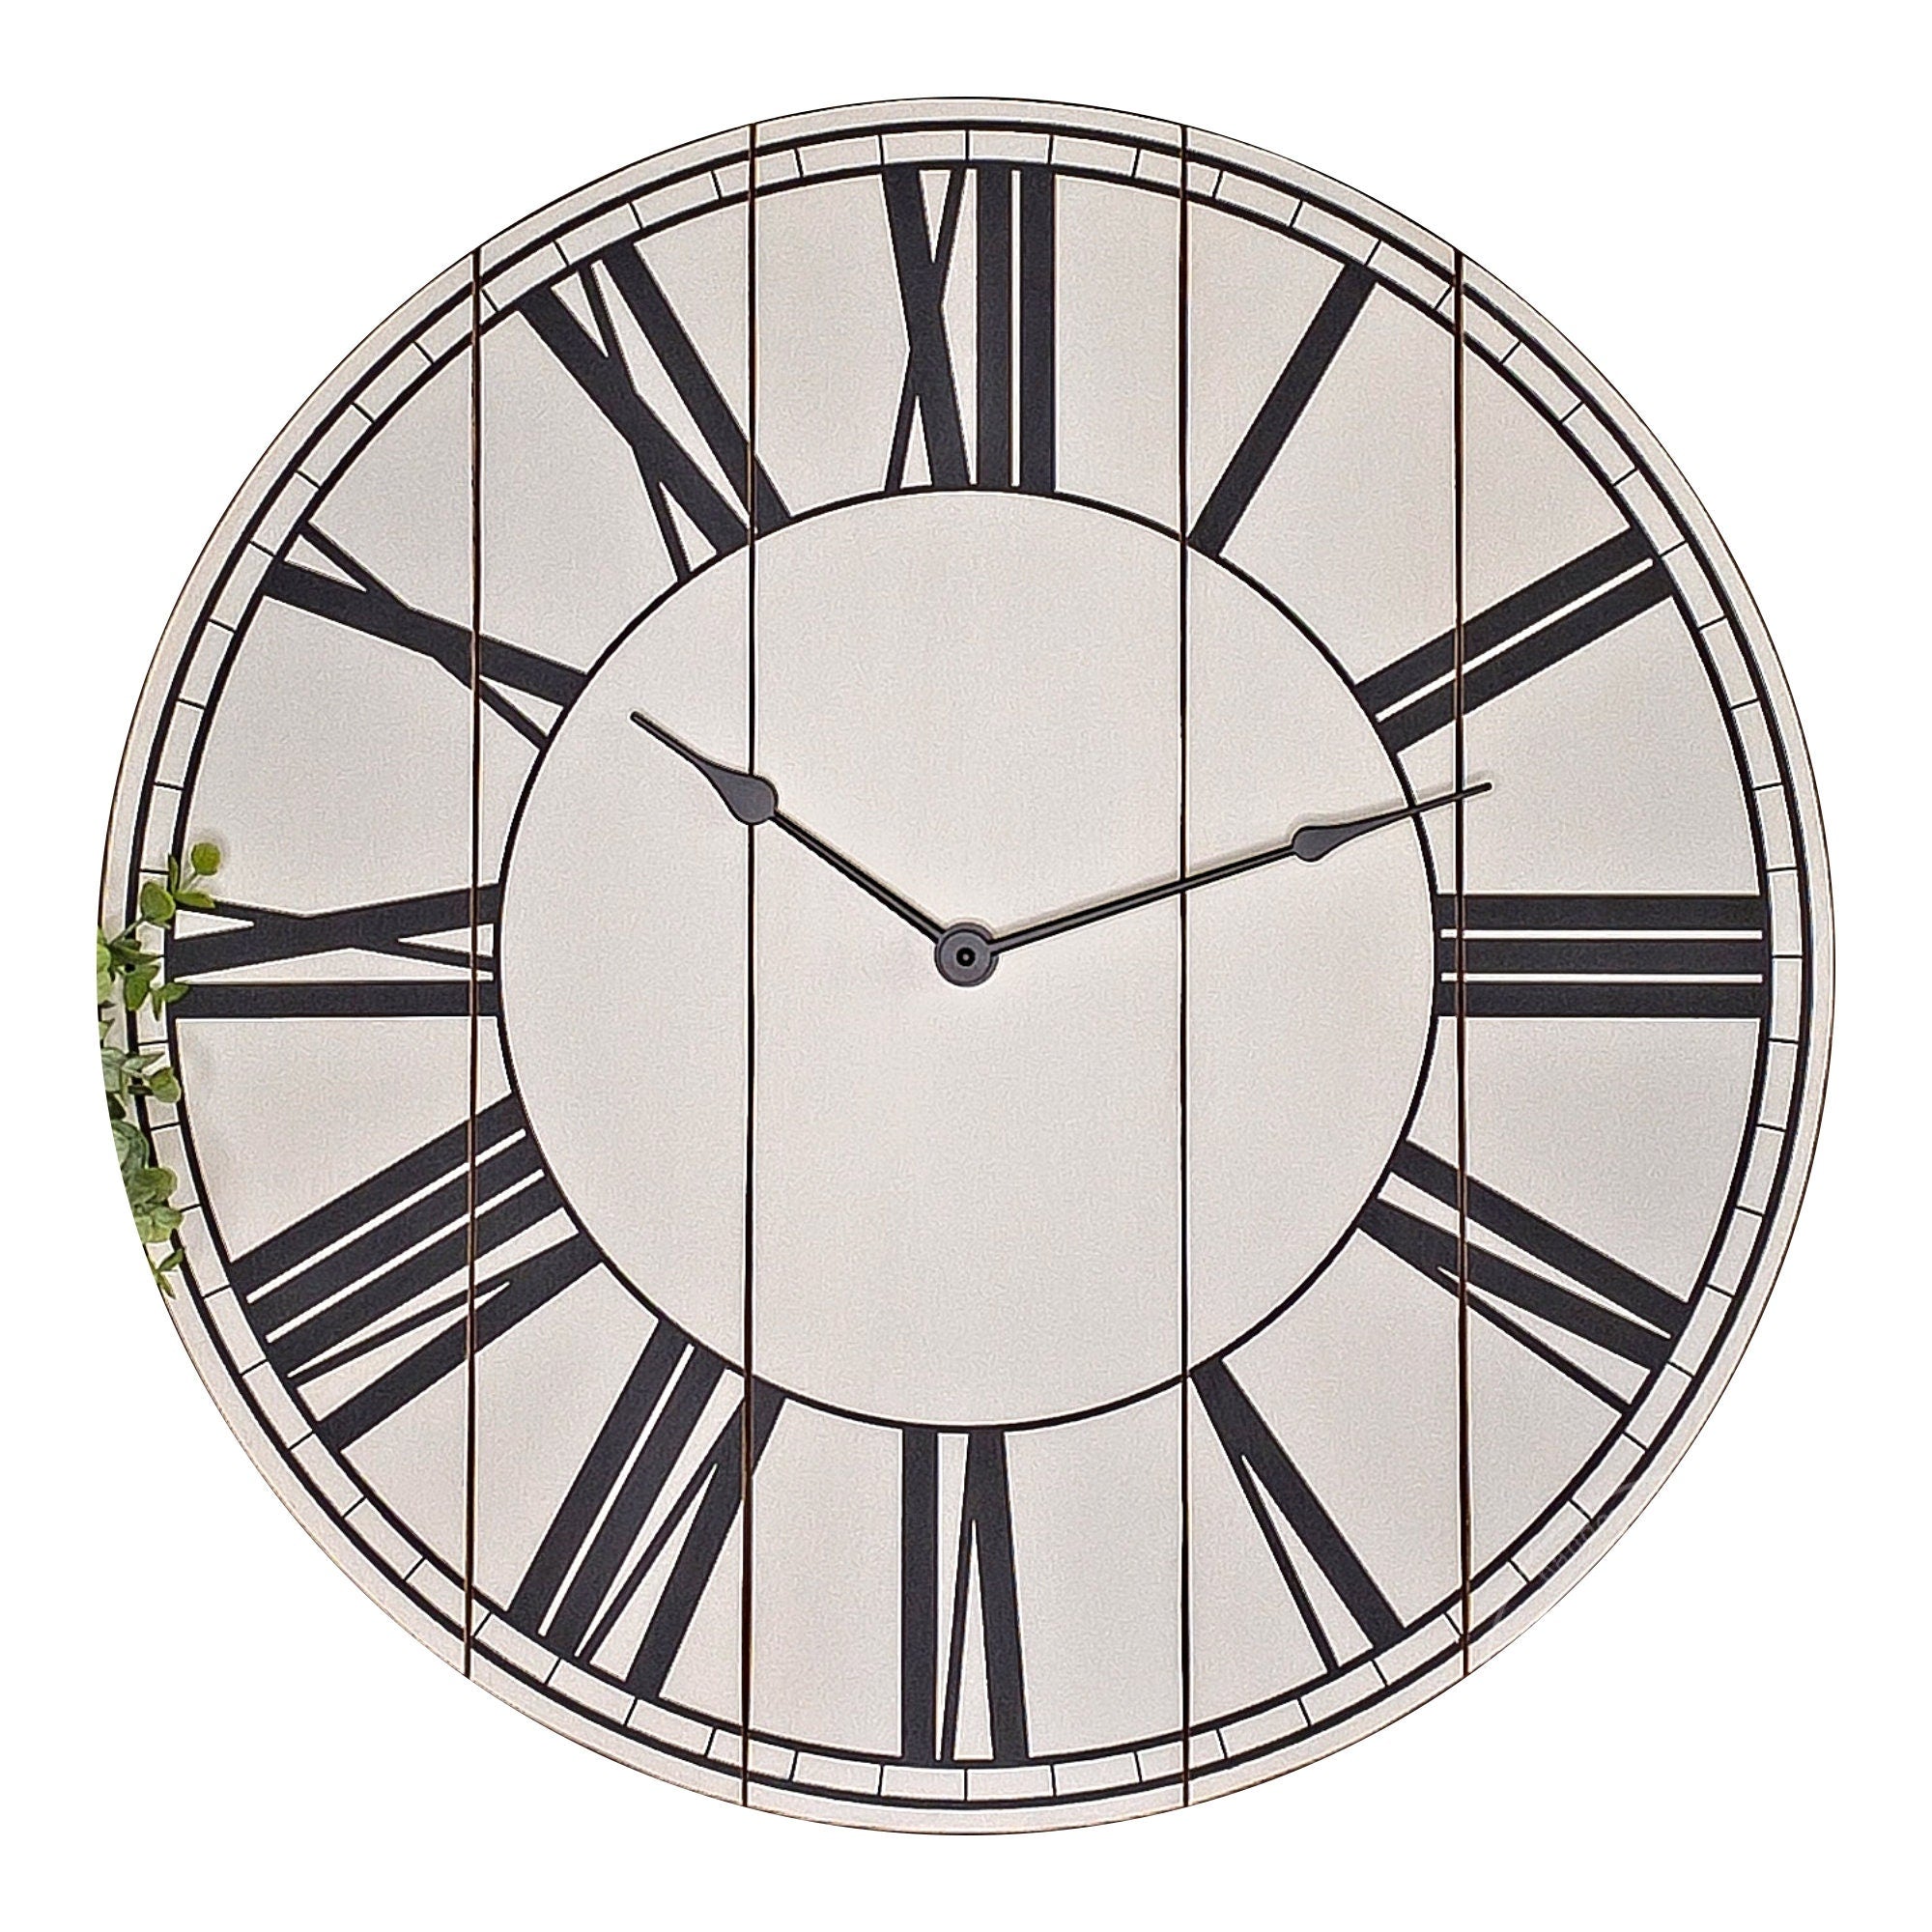 The Audrey Wooden Wall Clock